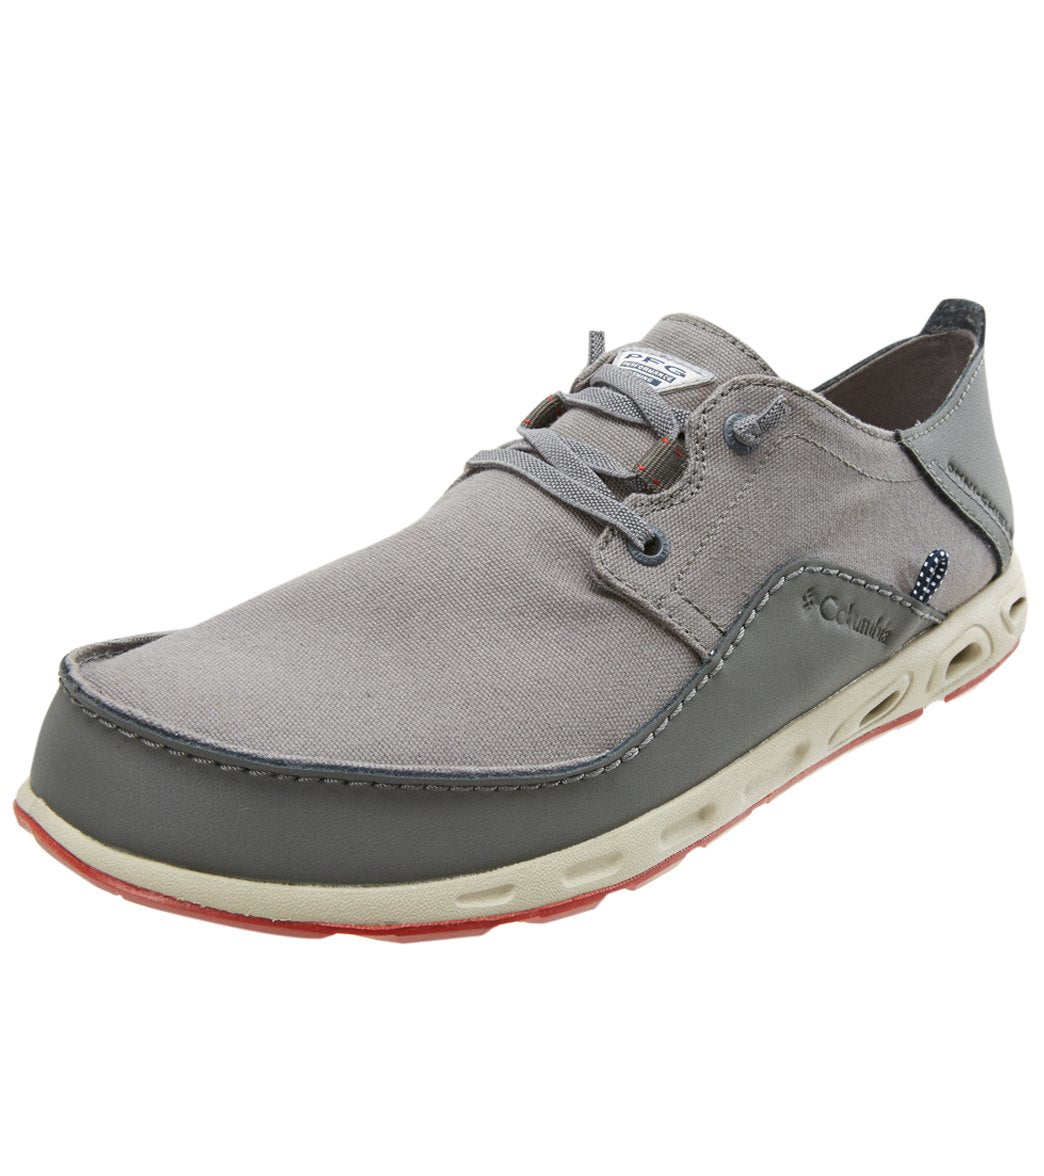 Columbia Men's Bahamatm Vented Relaxed Deck Shoe - City Grey Gypsy 10.5 Grey - Swimoutlet.com